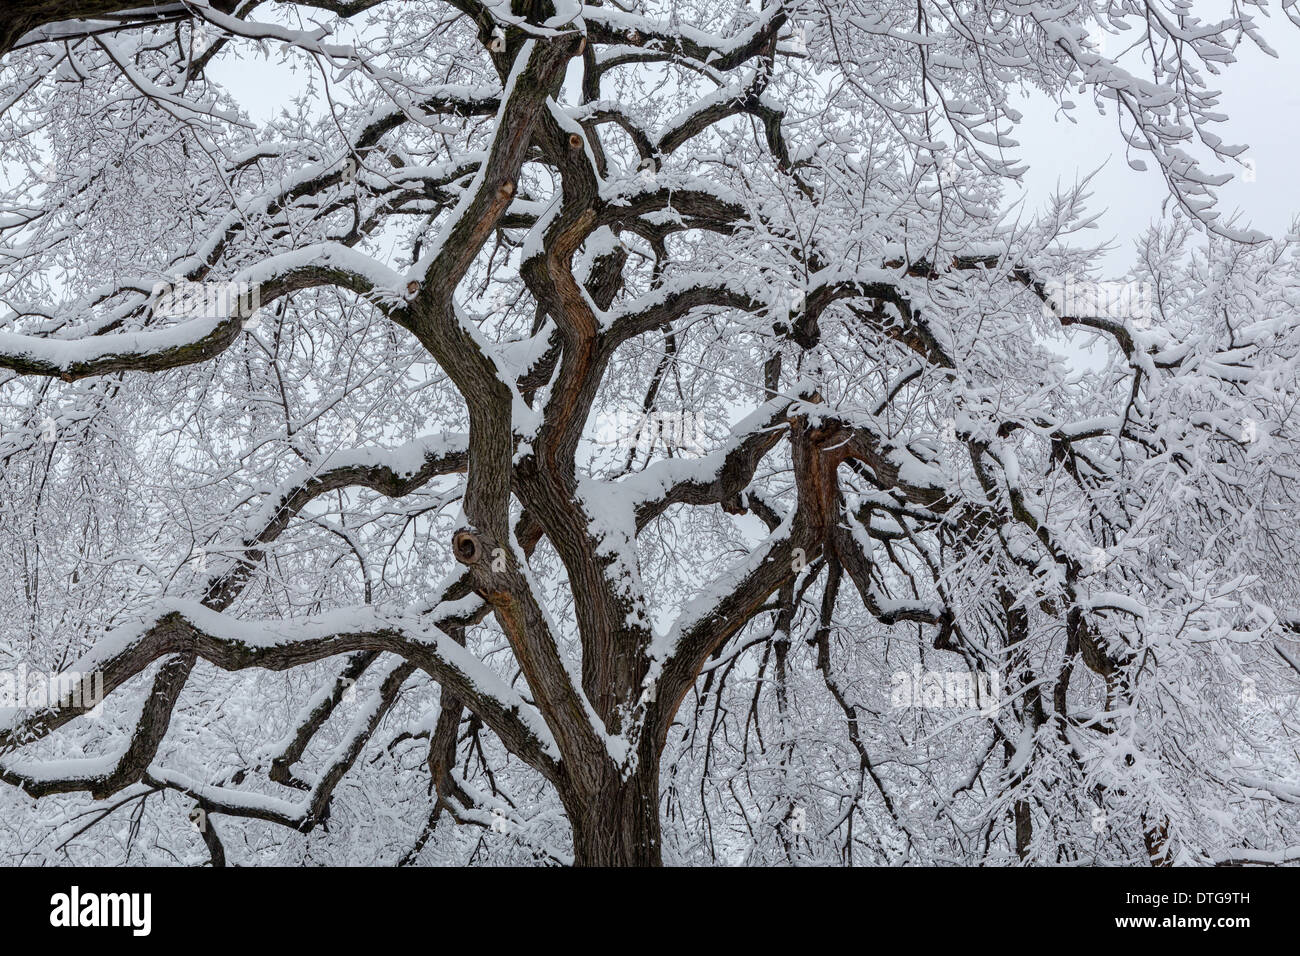 Snow covered tree in Central Park in New York City after a snow storm during the polar vortex. Stock Photo